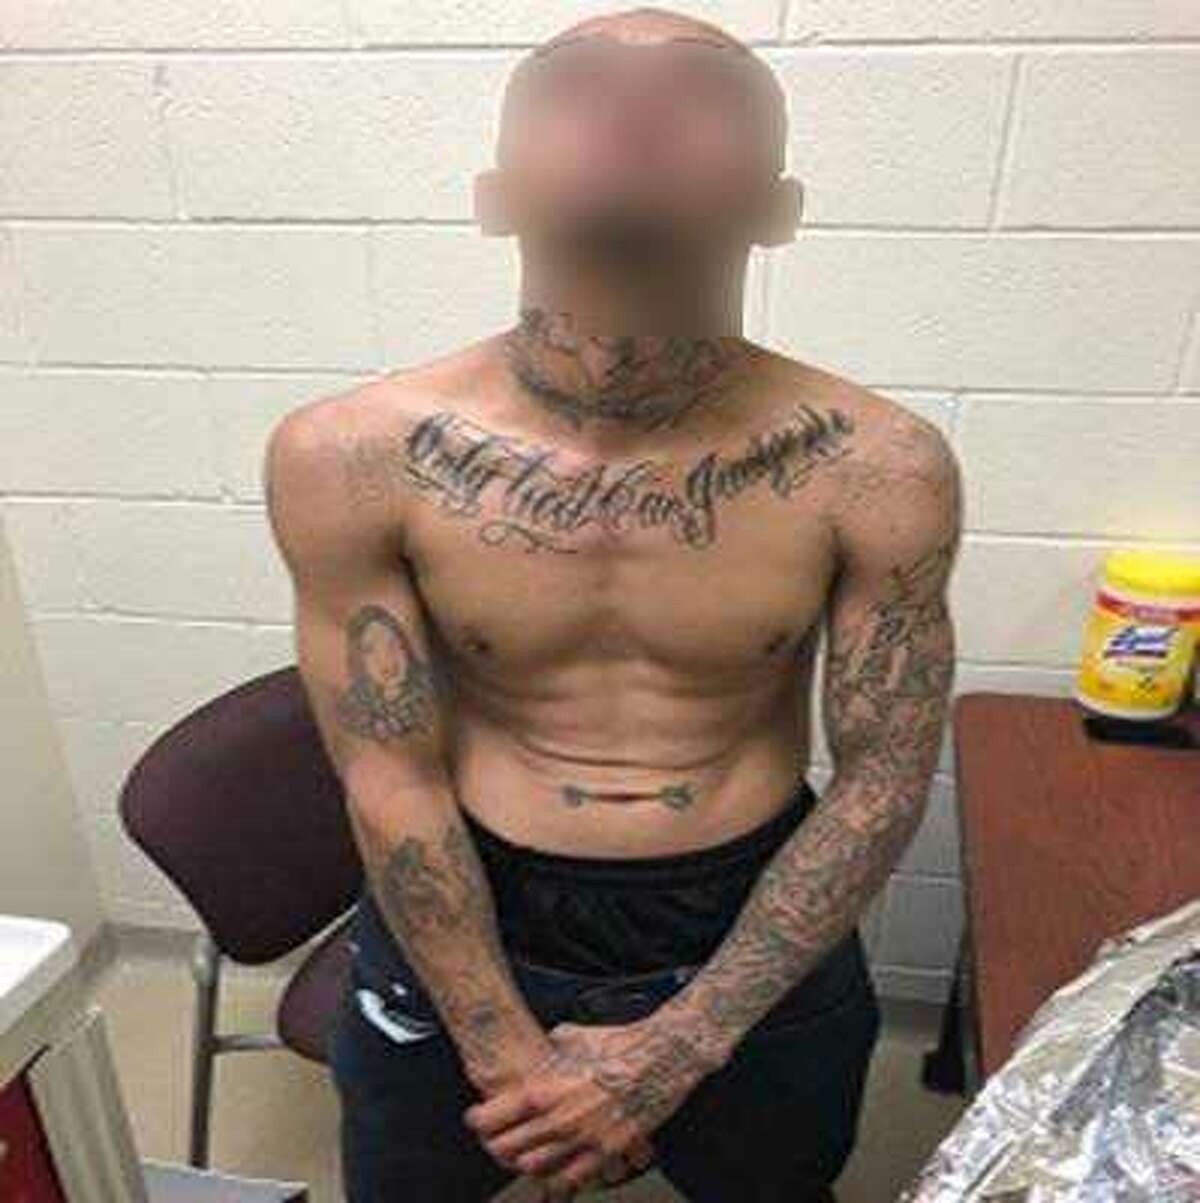 An alleged member of the Southwest Cholos Gang was arrested near Hebbronville, according to Border Patrol.